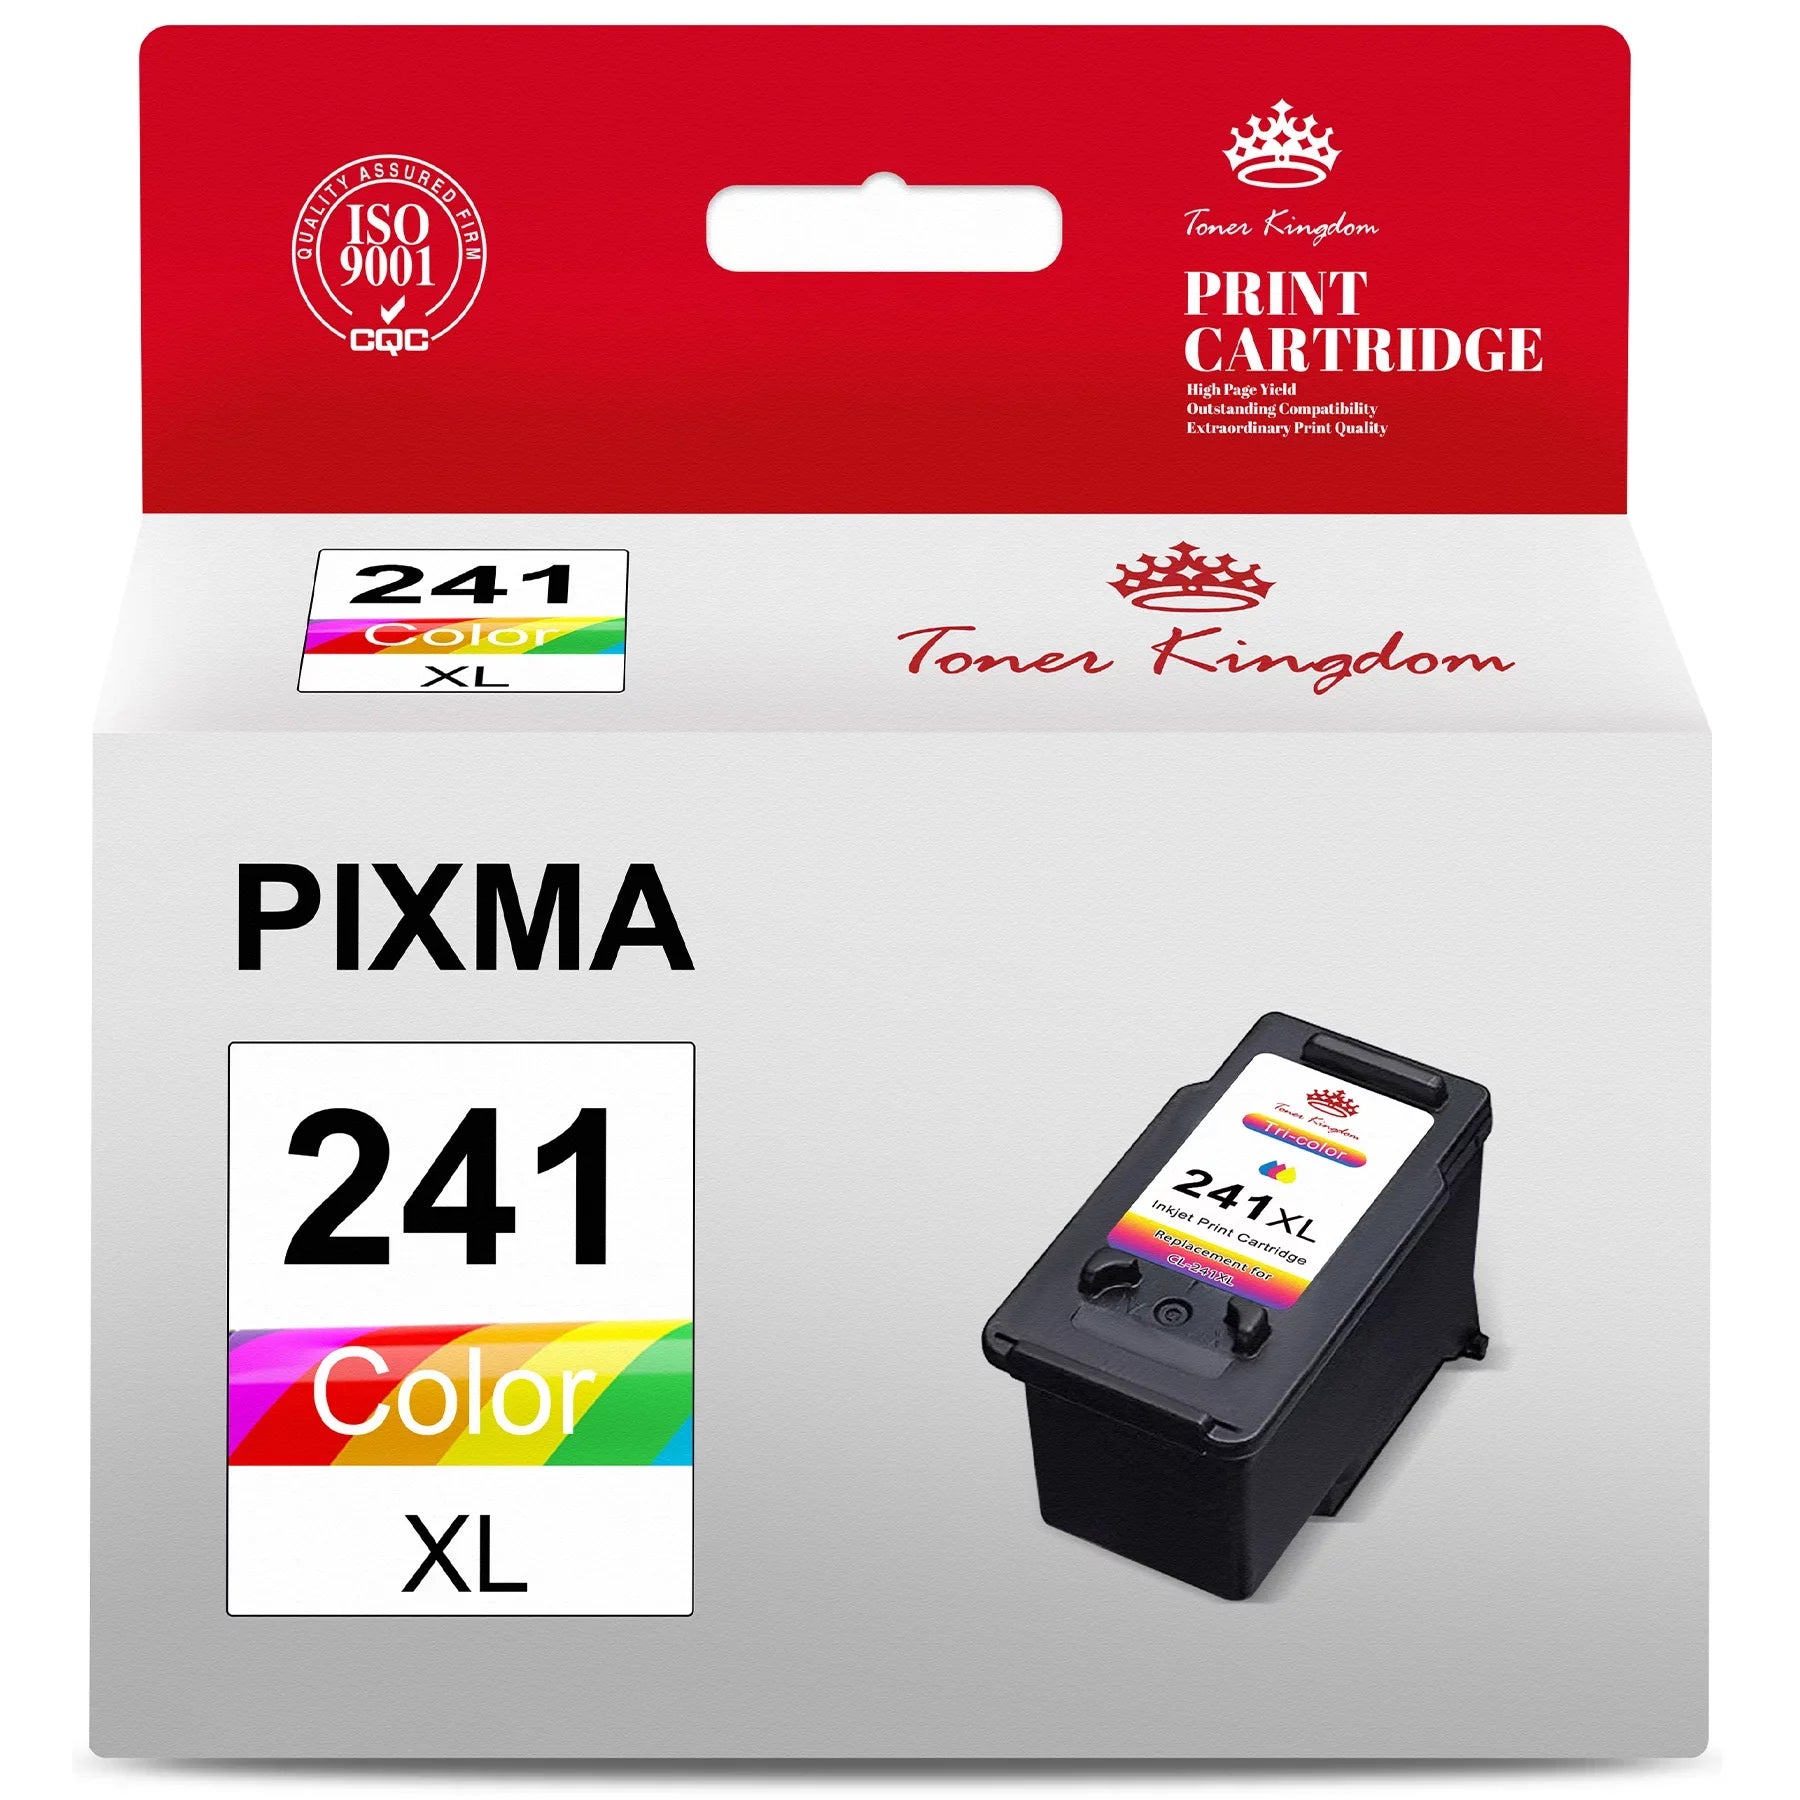 Ink & Toner-Toner Kingdom 241XL Ink Cartridge Replacement for Canon Printer,1 Pack